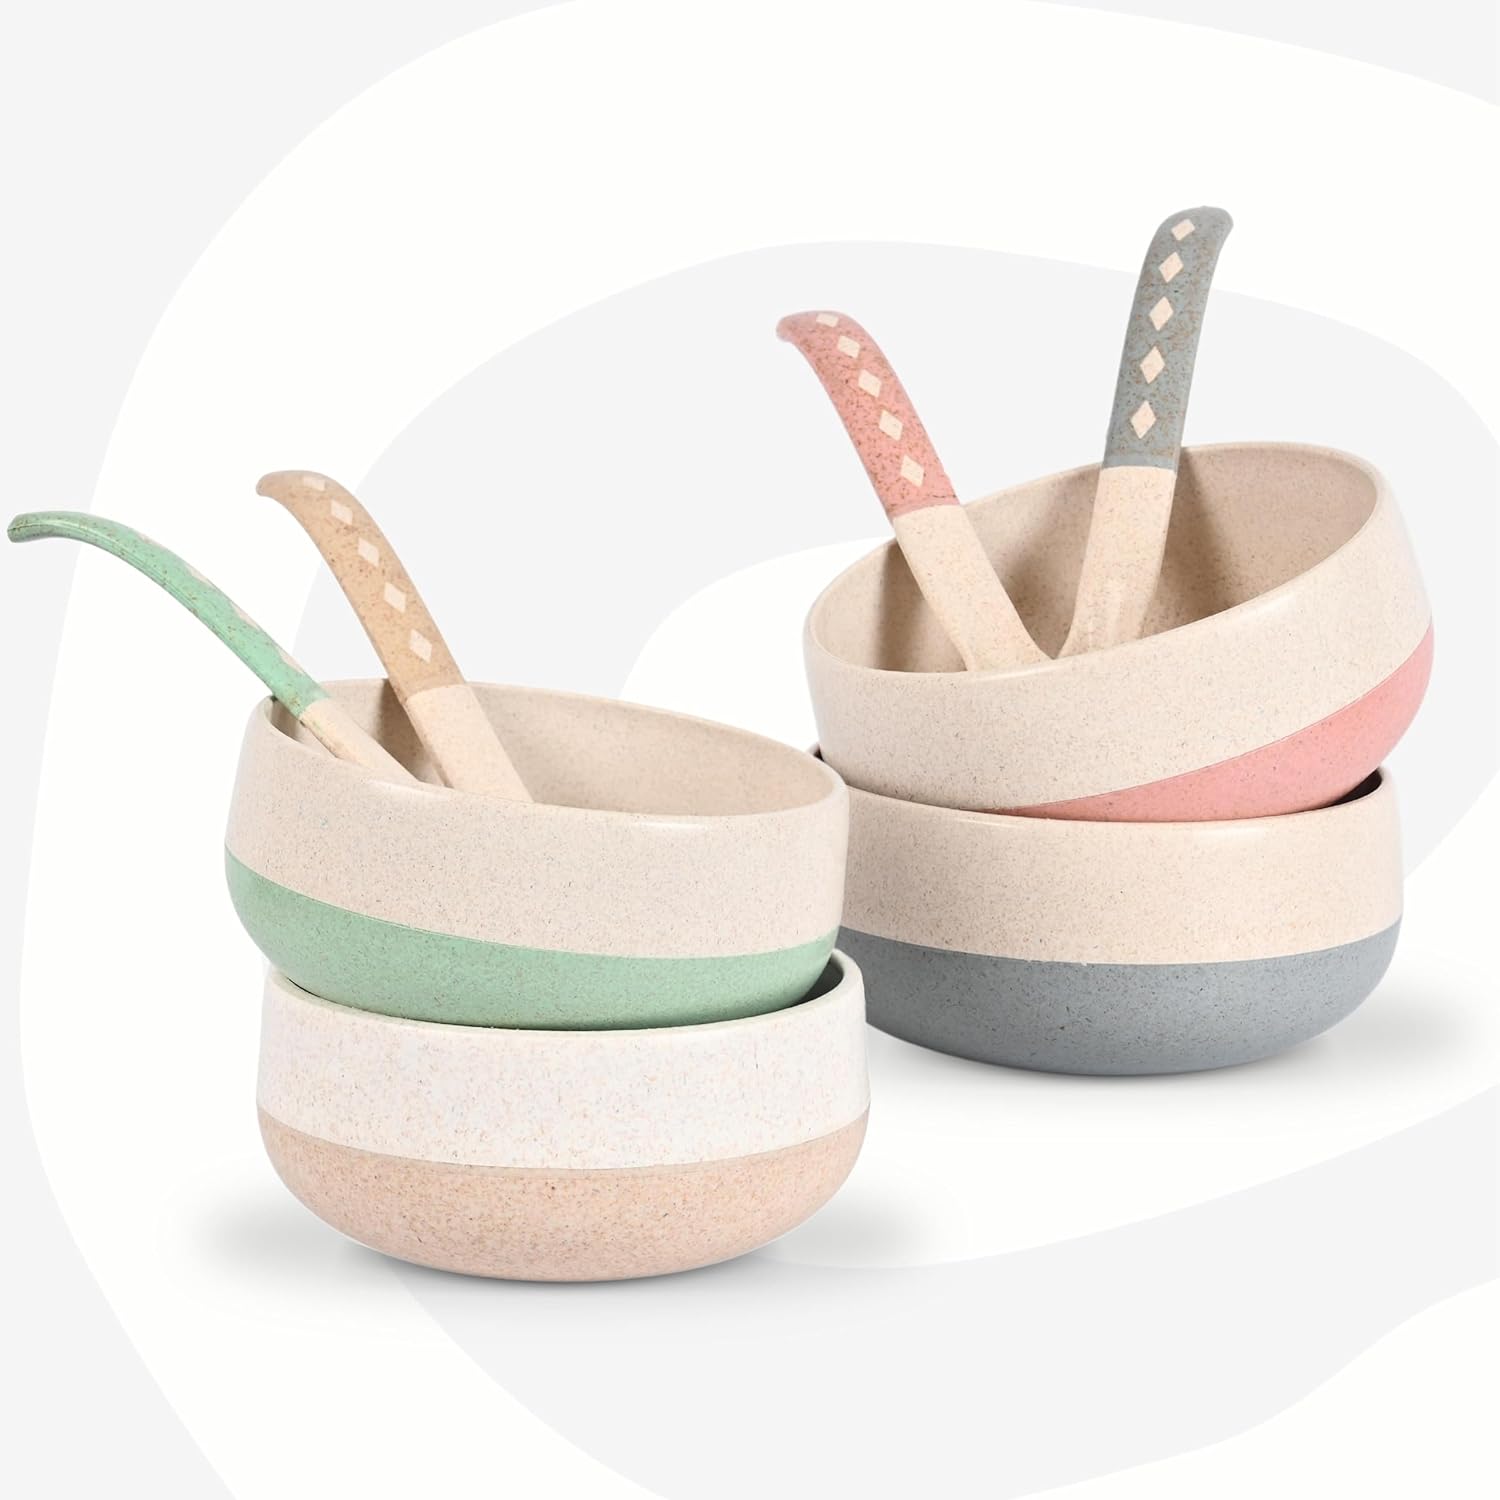 Microwave friendly Small Soup Bowls With Spoons made With Bamboo Fibers & Rice Husk (Set of 4)